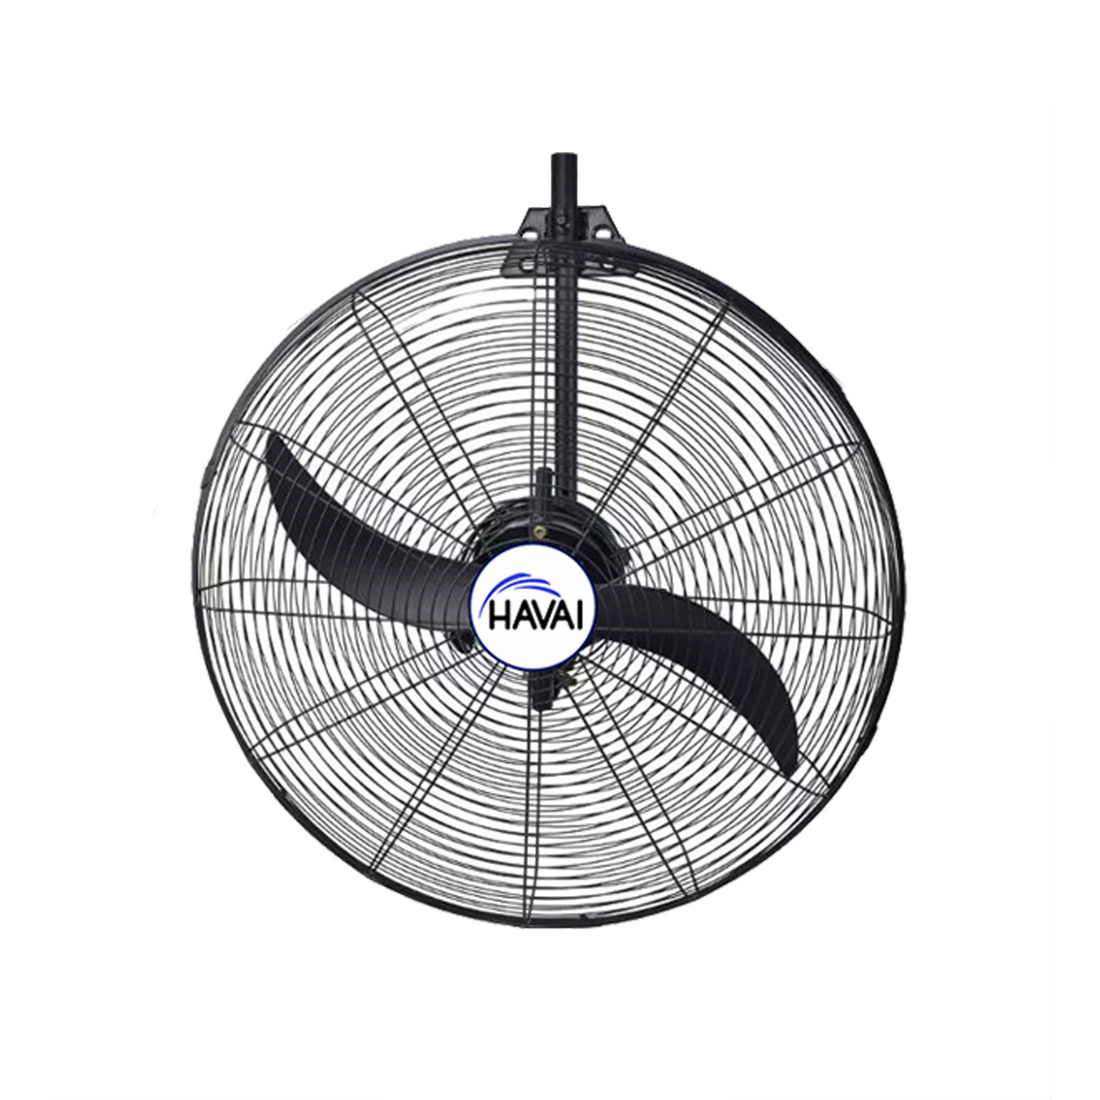 HAVAI BLDC Wall Mount Fan 26 inch, 50% Savings on Electricity, High Velocity, Heavy Duty Metal for Industrial, Commercial and Residential Use, Assembly Included